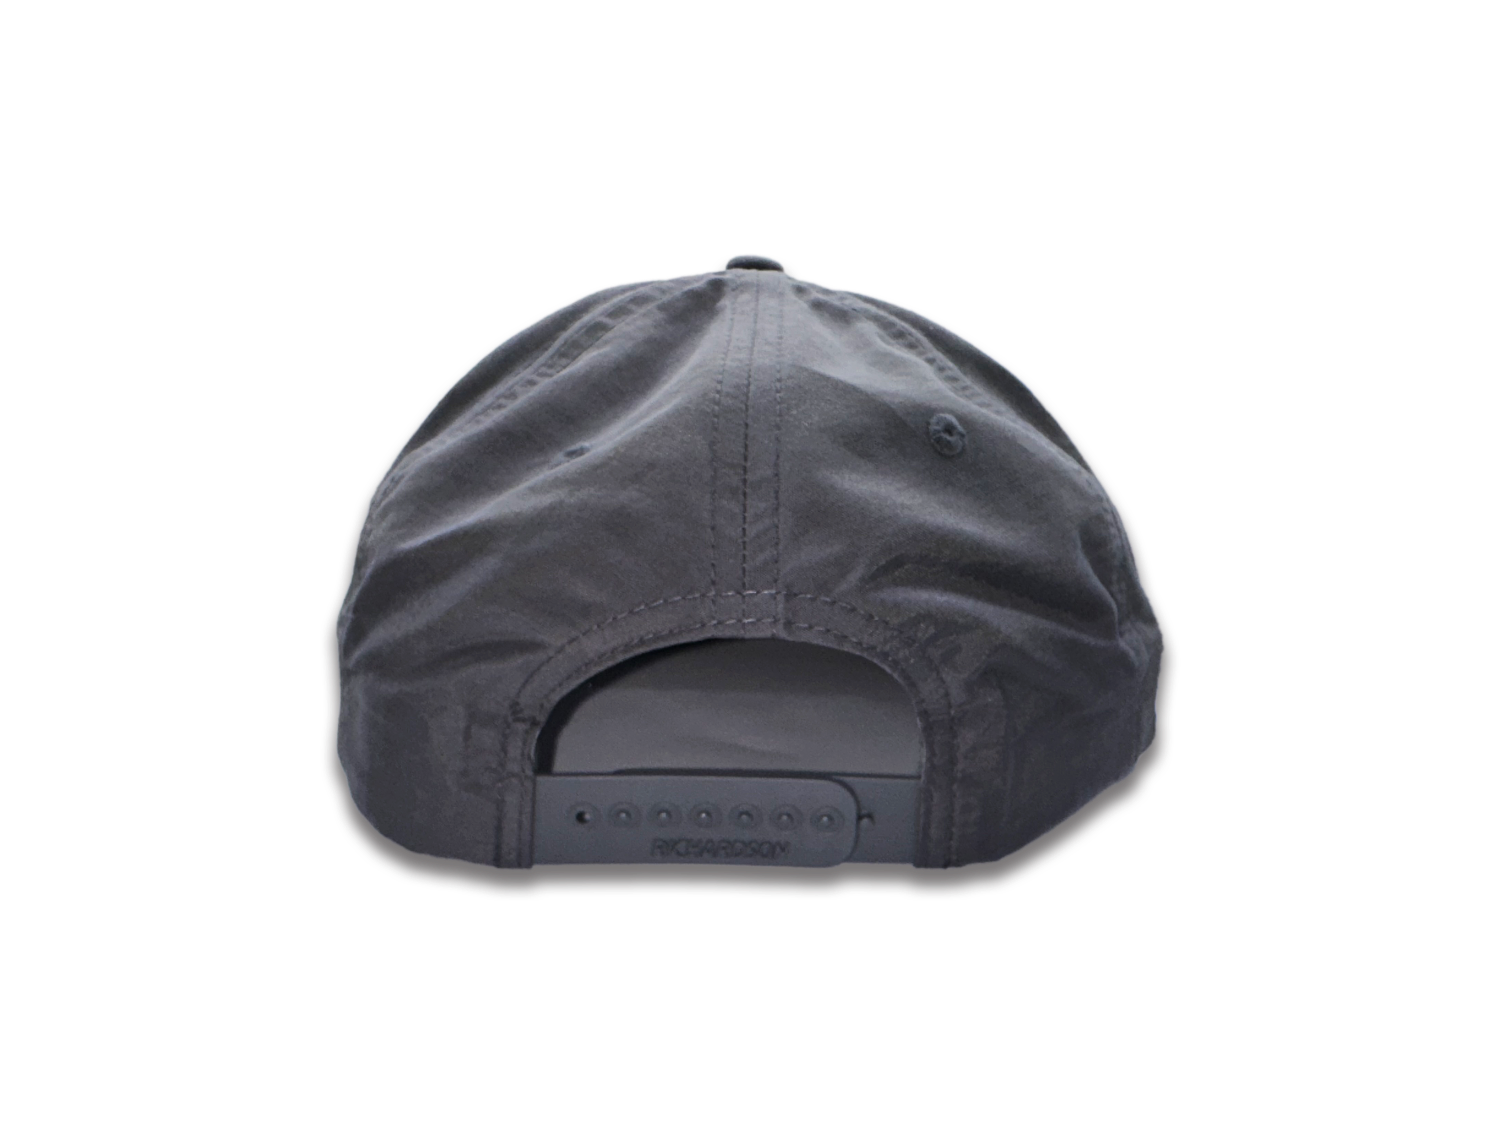 A SnapBack Richardson hat features an adjustable design that allows for a customizable fit. The hat is equipped with plastic snaps on the back, which can be easily adjusted to different sizes by snapping or unsnapping them. This adjustable feature ensures a secure and comfortable fit for various head sizes, making the SnapBack Richardson hat a versatile and practical choice for anyone looking for a personalized fit.